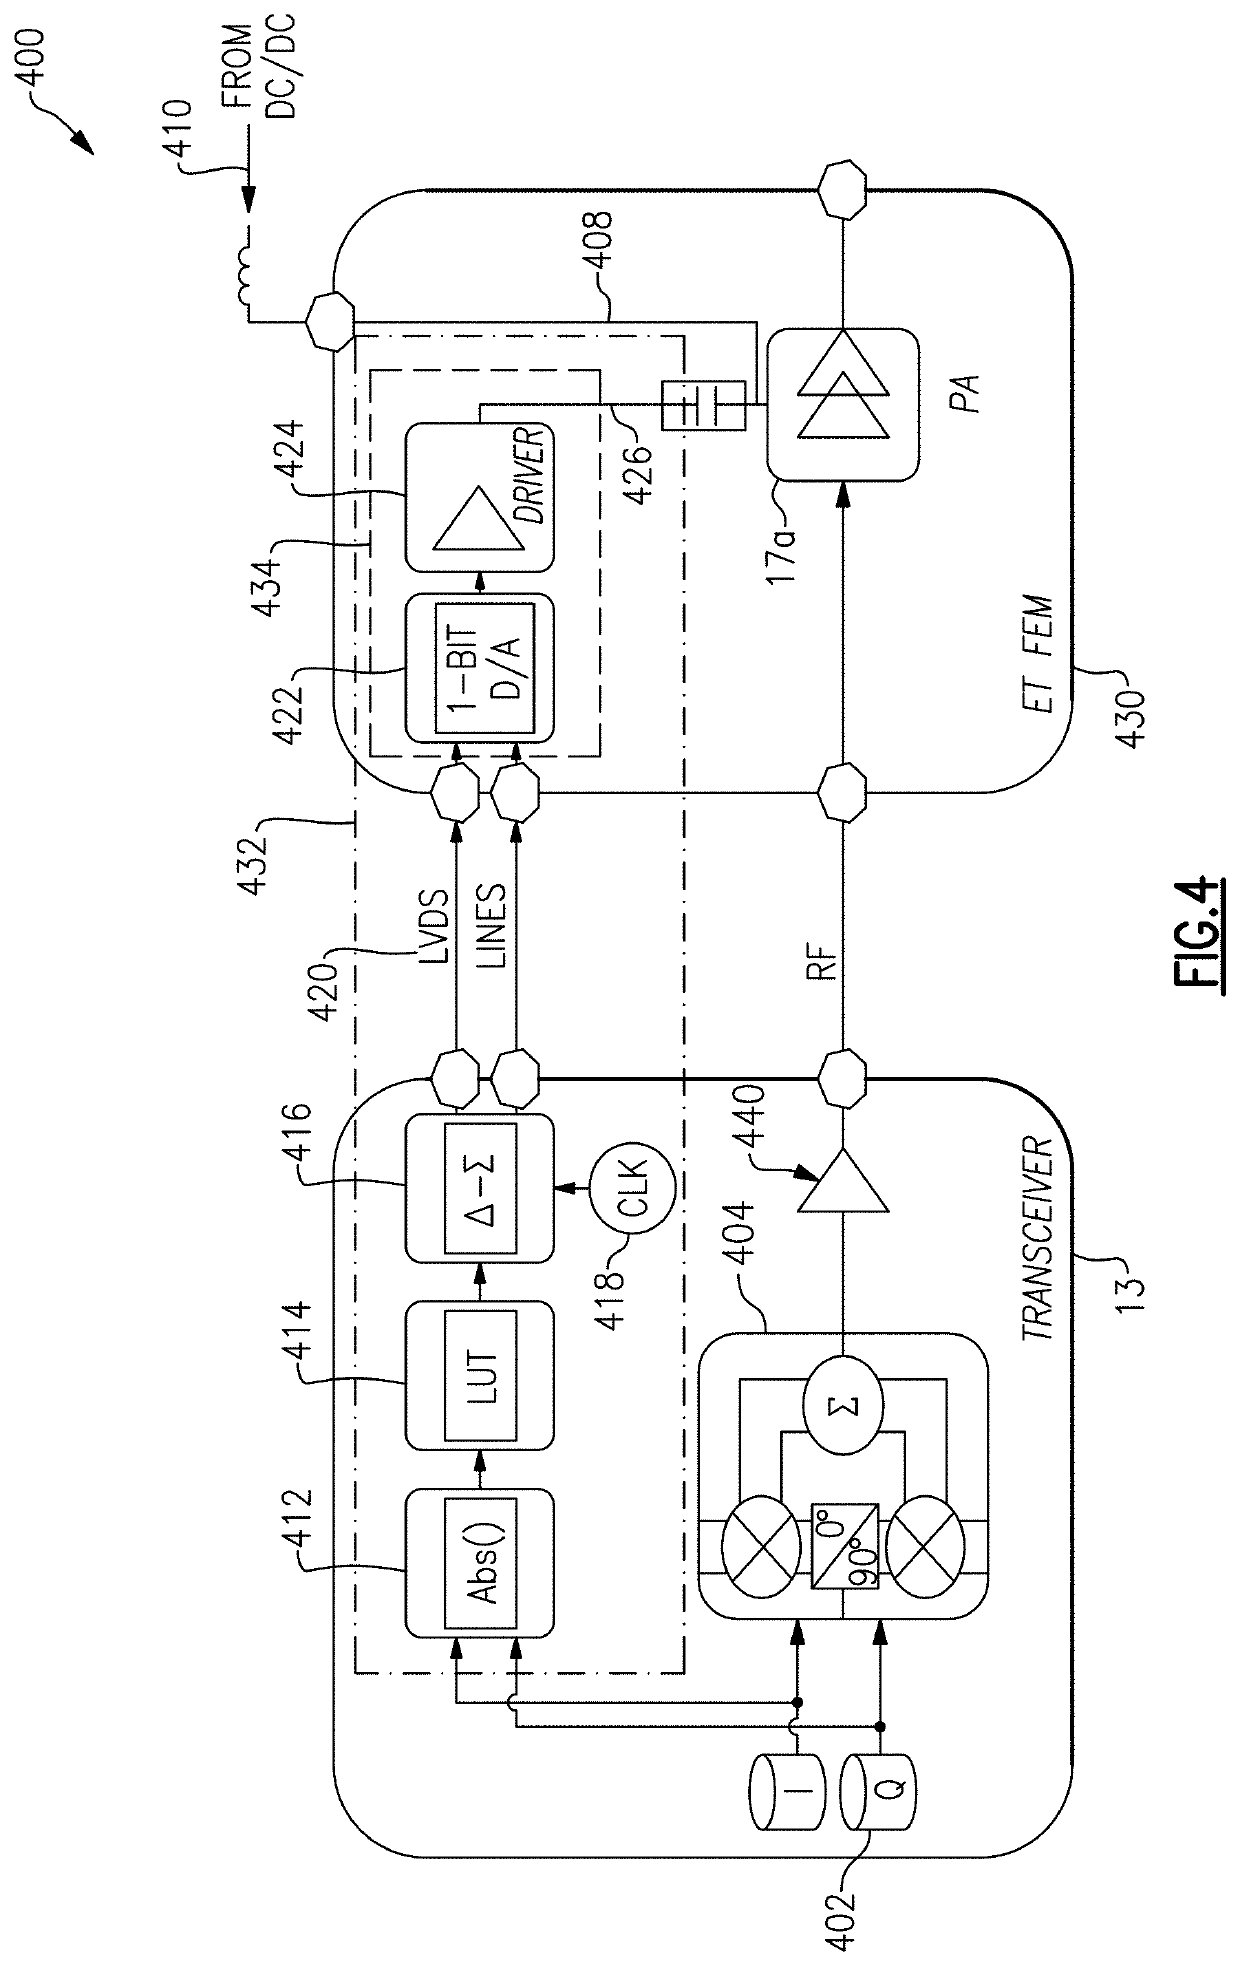 Automated envelope tracking system